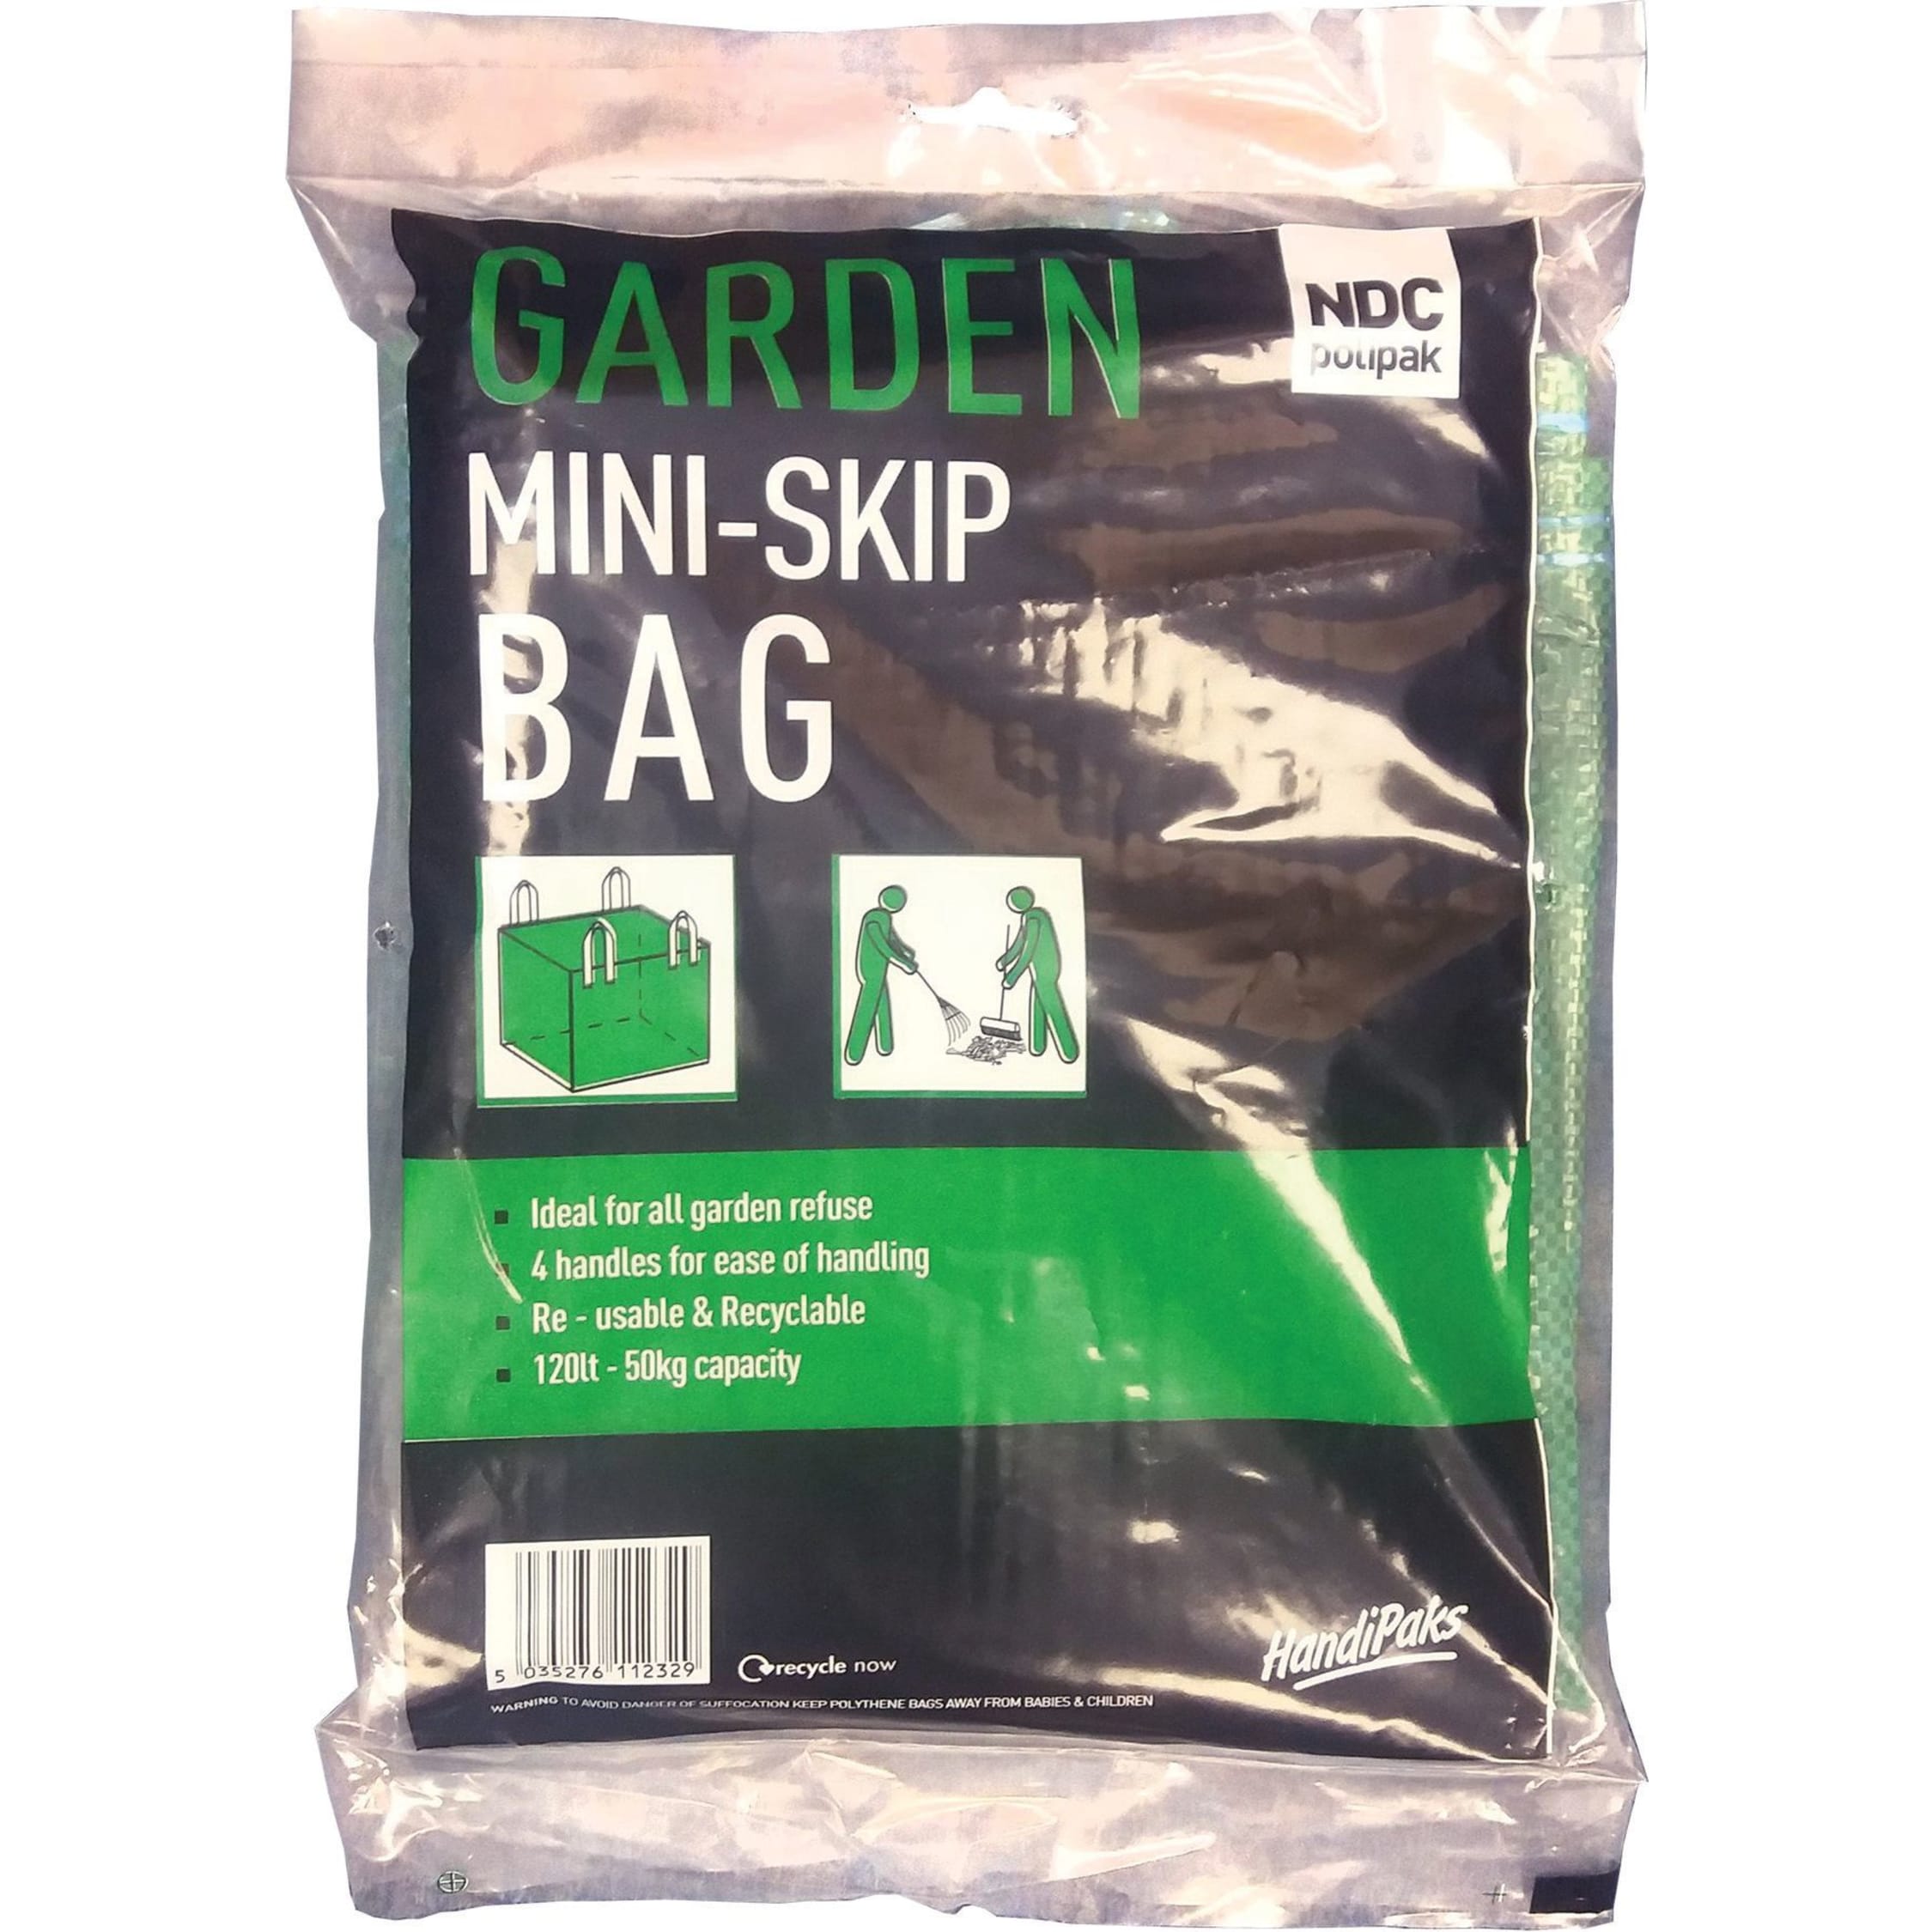 5 GroundMaster 120L Garden Waste Bags Heavy Duty Large Refuse Sacks with Handles